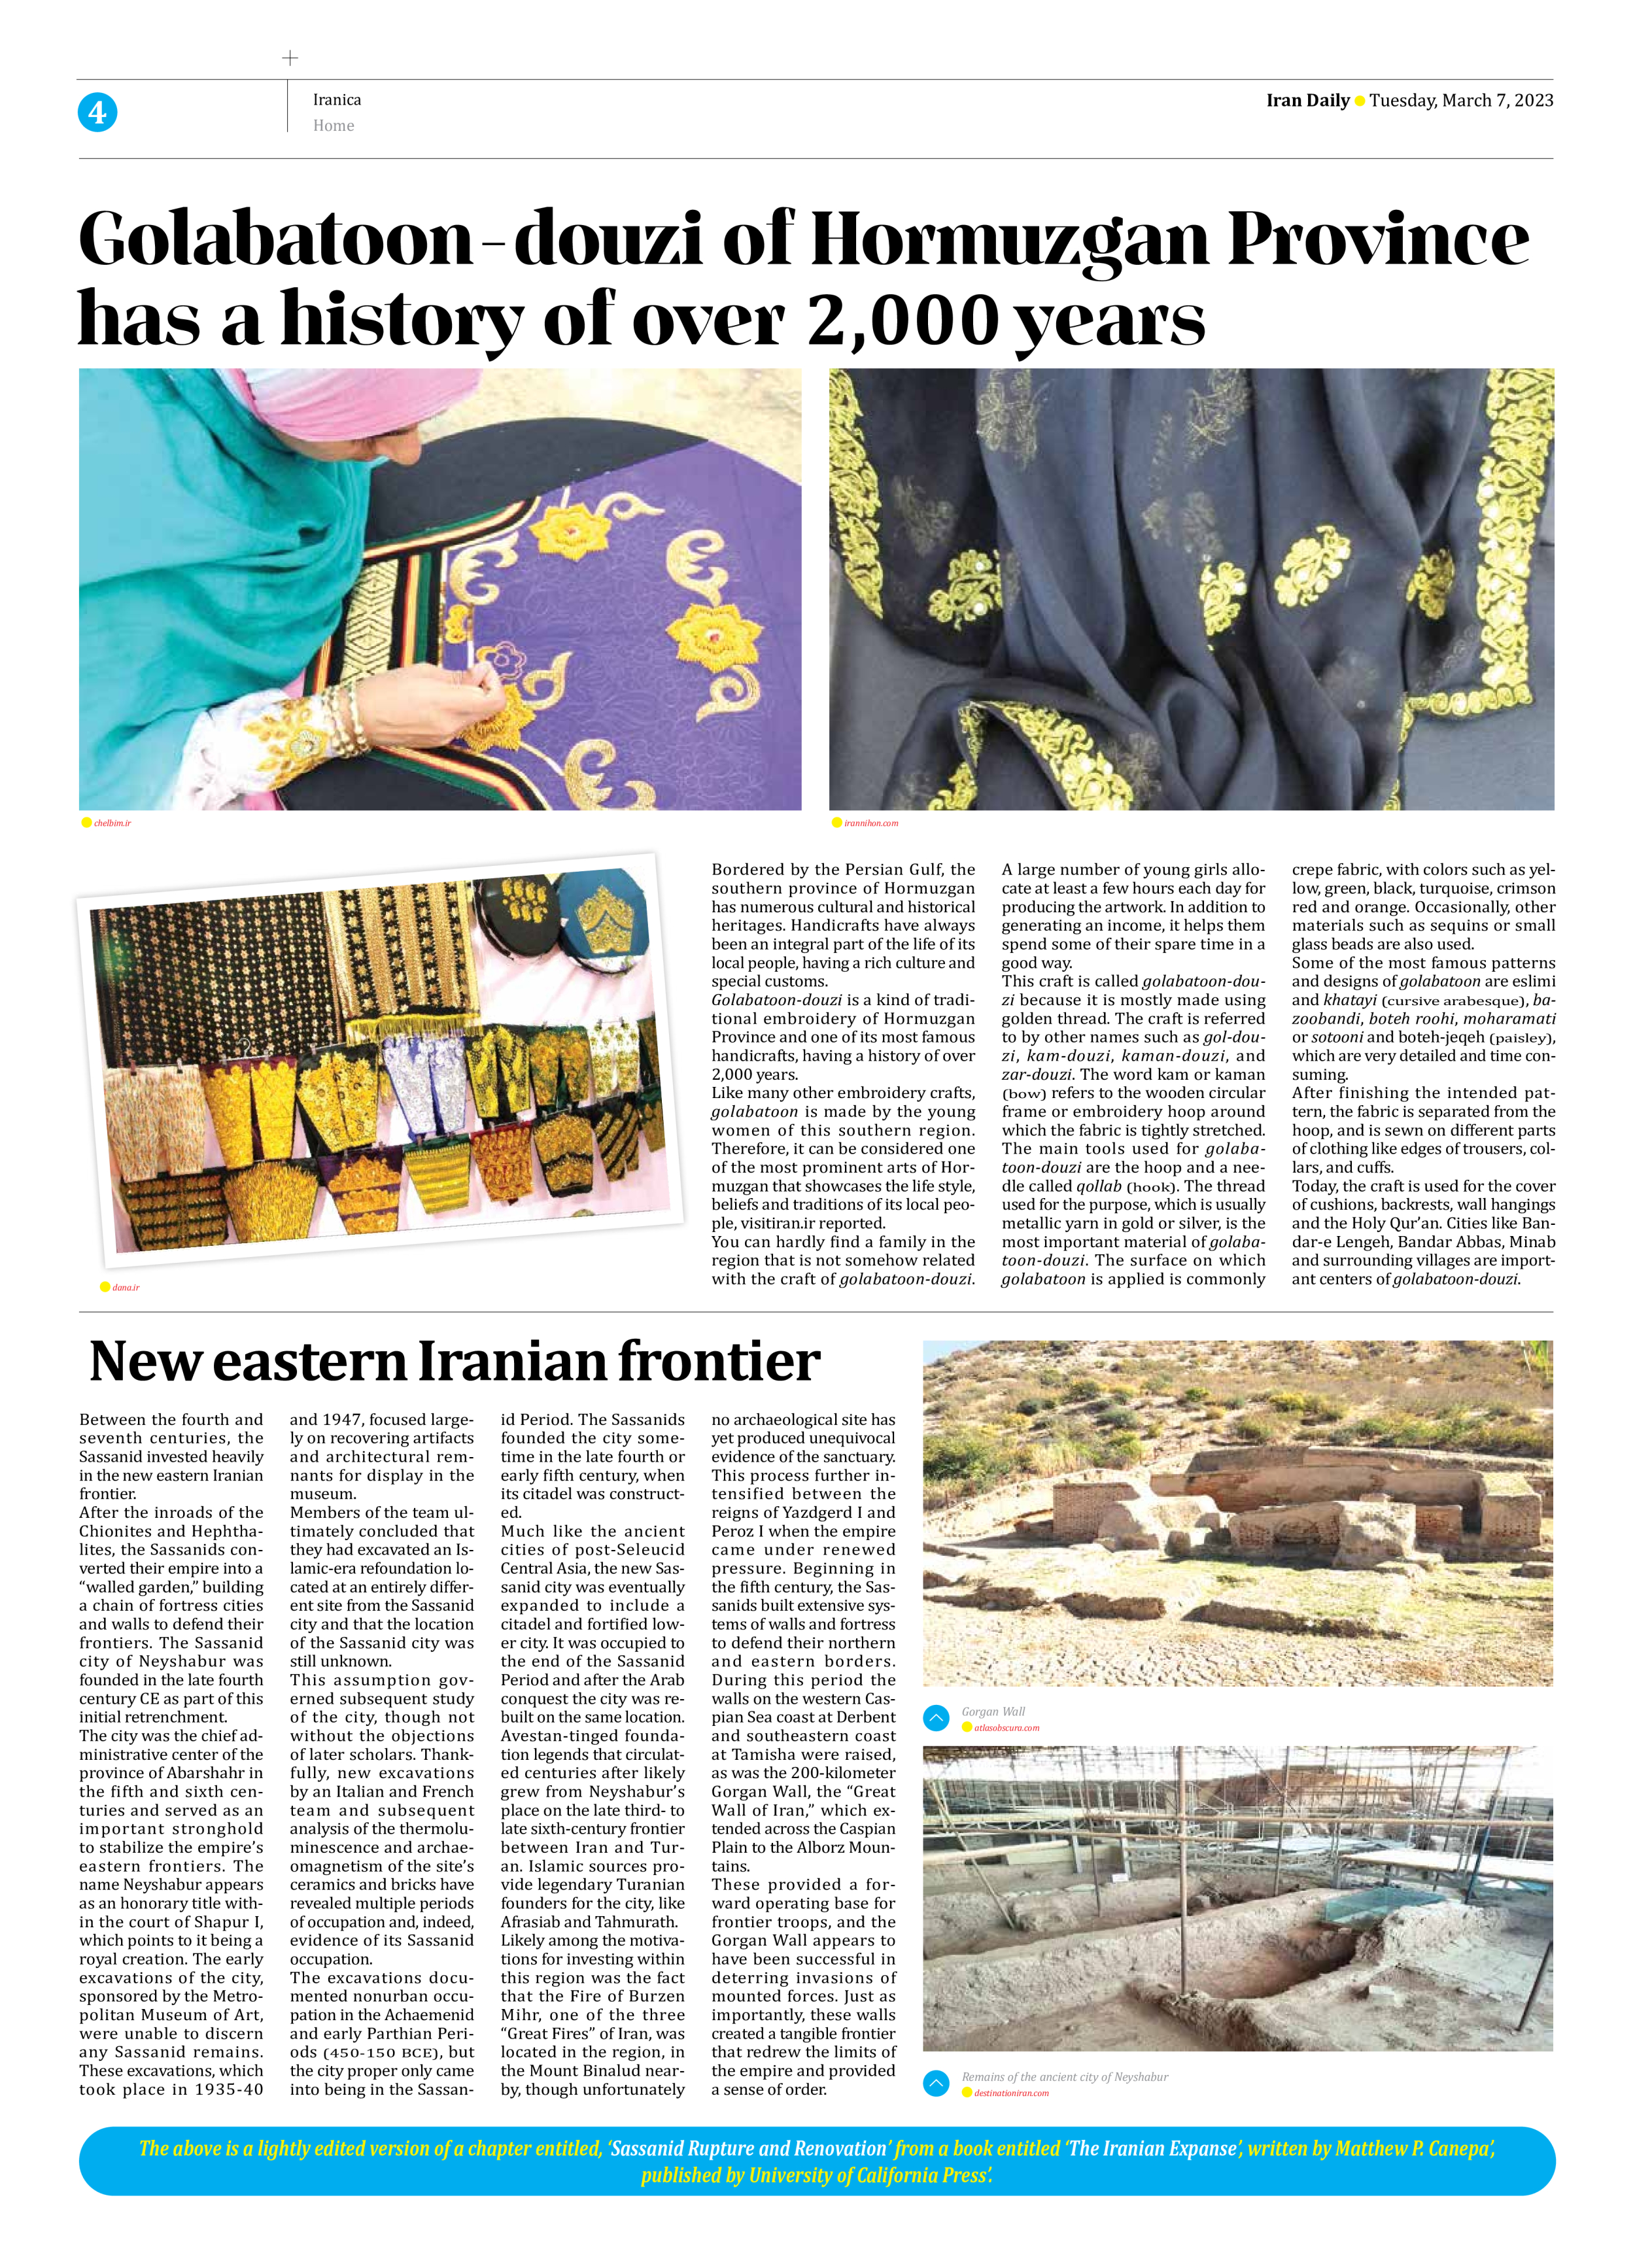 Iran Daily - Number Seven Thousand Two Hundred and Fifty Three - 07 March 2023 - Page 4